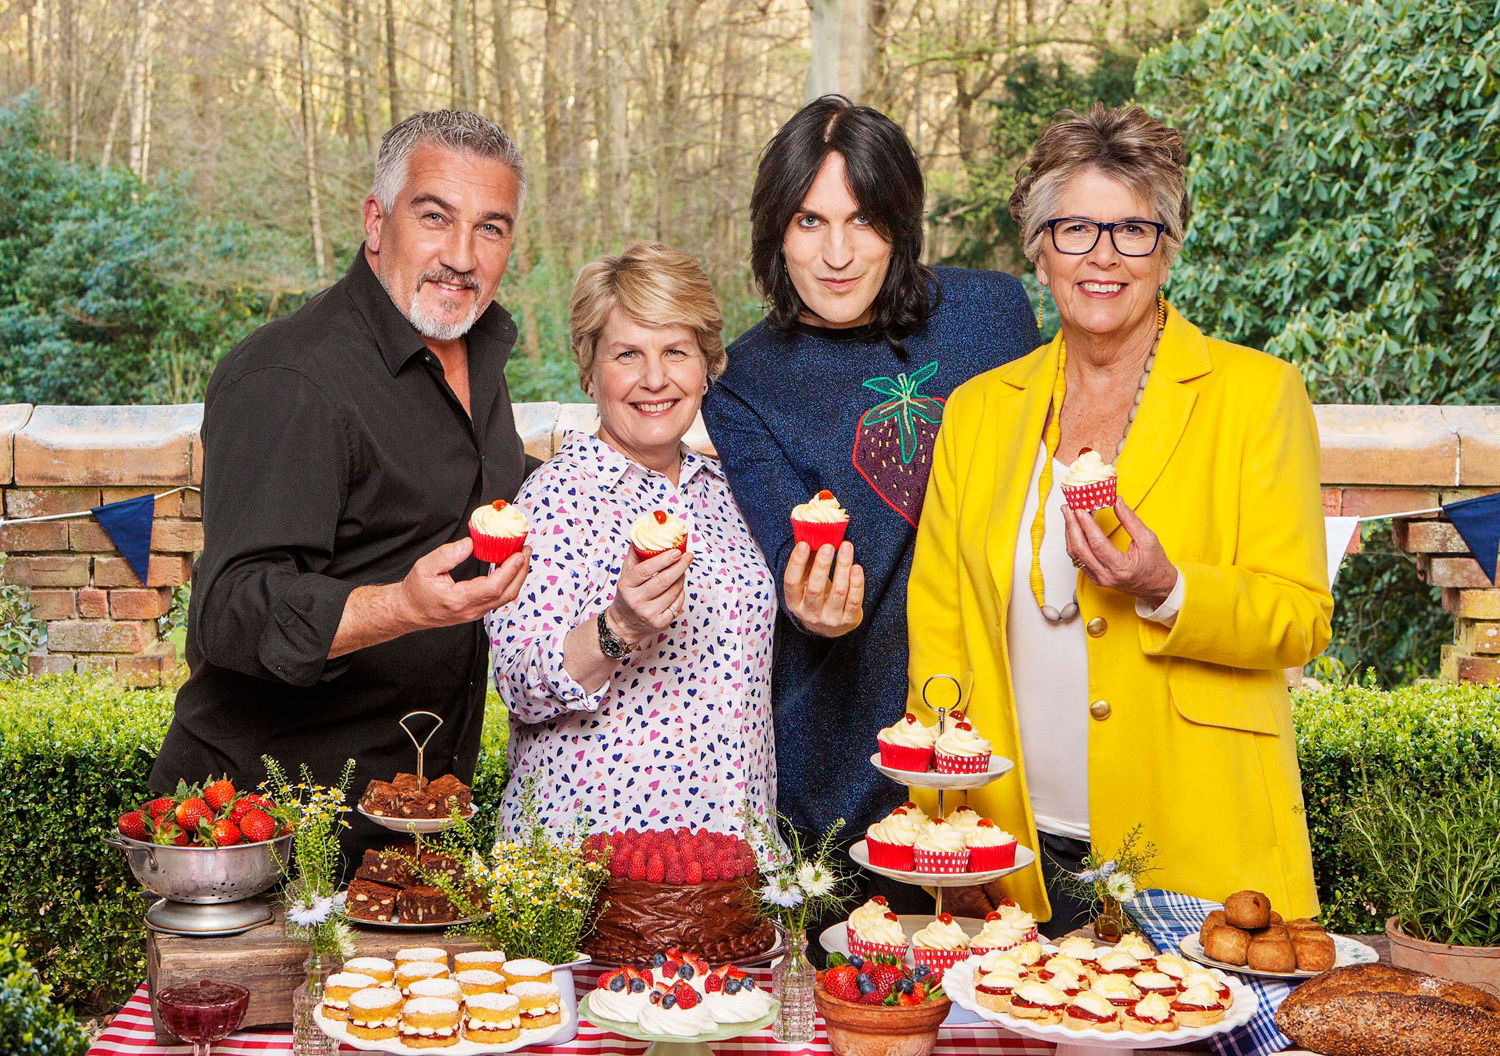 9 of our favourite moments from this year's Great British Bake Off